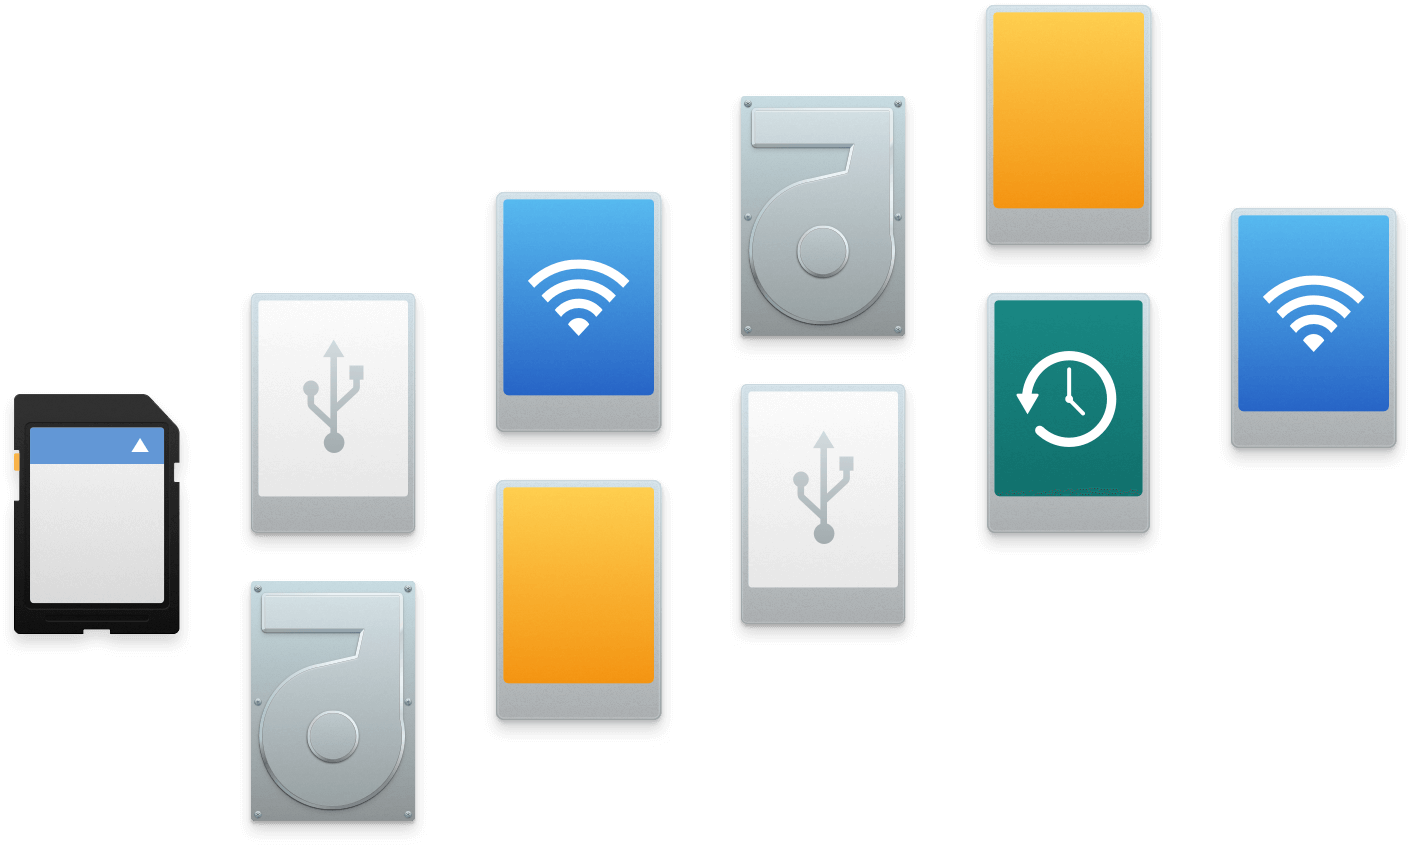 How To Change The Icon For An External Hard Drive On A Mac